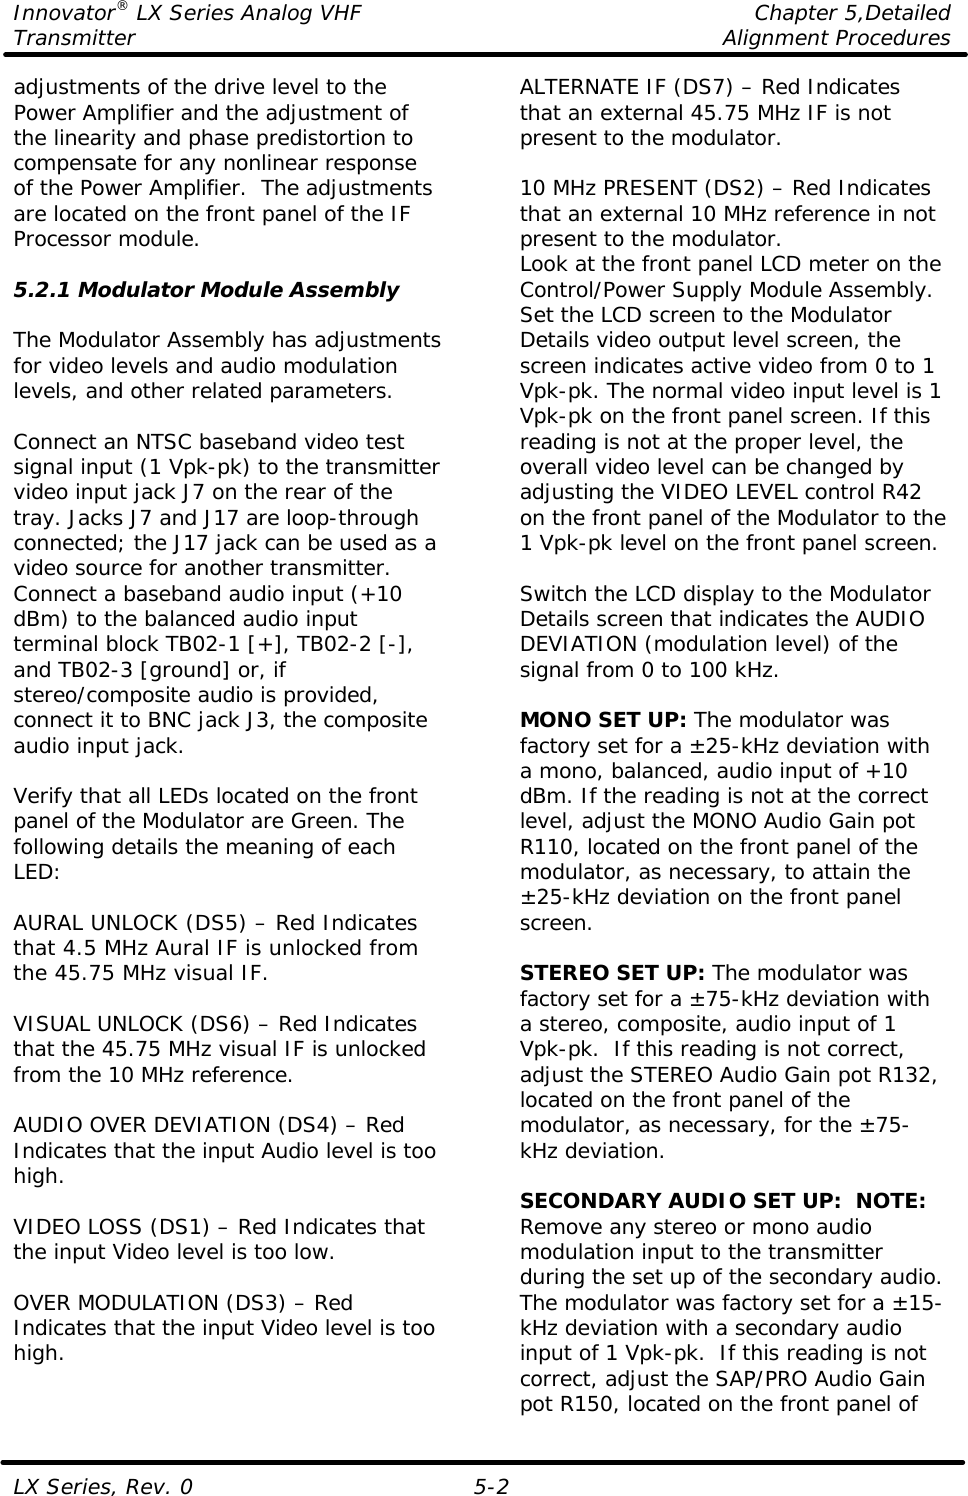 Innovator® LX Series Analog VHF    Chapter 5,Detailed Transmitter    Alignment Procedures  LX Series, Rev. 0 5-2 adjustments of the drive level to the Power Amplifier and the adjustment of the linearity and phase predistortion to compensate for any nonlinear response of the Power Amplifier.  The adjustments are located on the front panel of the IF Processor module.  5.2.1 Modulator Module Assembly  The Modulator Assembly has adjustments for video levels and audio modulation levels, and other related parameters.    Connect an NTSC baseband video test signal input (1 Vpk-pk) to the transmitter video input jack J7 on the rear of the tray. Jacks J7 and J17 are loop-through connected; the J17 jack can be used as a video source for another transmitter. Connect a baseband audio input (+10 dBm) to the balanced audio input terminal block TB02-1 [+], TB02-2 [-], and TB02-3 [ground] or, if stereo/composite audio is provided, connect it to BNC jack J3, the composite audio input jack.  Verify that all LEDs located on the front panel of the Modulator are Green. The following details the meaning of each LED:  AURAL UNLOCK (DS5) – Red Indicates that 4.5 MHz Aural IF is unlocked from the 45.75 MHz visual IF.  VISUAL UNLOCK (DS6) – Red Indicates that the 45.75 MHz visual IF is unlocked from the 10 MHz reference.  AUDIO OVER DEVIATION (DS4) – Red Indicates that the input Audio level is too high.  VIDEO LOSS (DS1) – Red Indicates that the input Video level is too low.  OVER MODULATION (DS3) – Red Indicates that the input Video level is too high. ALTERNATE IF (DS7) – Red Indicates that an external 45.75 MHz IF is not present to the modulator.  10 MHz PRESENT (DS2) – Red Indicates that an external 10 MHz reference in not present to the modulator. Look at the front panel LCD meter on the Control/Power Supply Module Assembly.  Set the LCD screen to the Modulator Details video output level screen, the screen indicates active video from 0 to 1 Vpk-pk. The normal video input level is 1 Vpk-pk on the front panel screen. If this reading is not at the proper level, the overall video level can be changed by adjusting the VIDEO LEVEL control R42 on the front panel of the Modulator to the 1 Vpk-pk level on the front panel screen.  Switch the LCD display to the Modulator Details screen that indicates the AUDIO DEVIATION (modulation level) of the signal from 0 to 100 kHz.  MONO SET UP: The modulator was factory set for a ±25-kHz deviation with a mono, balanced, audio input of +10 dBm. If the reading is not at the correct level, adjust the MONO Audio Gain pot R110, located on the front panel of the modulator, as necessary, to attain the ±25-kHz deviation on the front panel screen.  STEREO SET UP: The modulator was factory set for a ±75-kHz deviation with a stereo, composite, audio input of 1 Vpk-pk.  If this reading is not correct, adjust the STEREO Audio Gain pot R132, located on the front panel of the modulator, as necessary, for the ±75-kHz deviation.  SECONDARY AUDIO SET UP:  NOTE: Remove any stereo or mono audio modulation input to the transmitter during the set up of the secondary audio.  The modulator was factory set for a ±15-kHz deviation with a secondary audio input of 1 Vpk-pk.  If this reading is not correct, adjust the SAP/PRO Audio Gain pot R150, located on the front panel of 